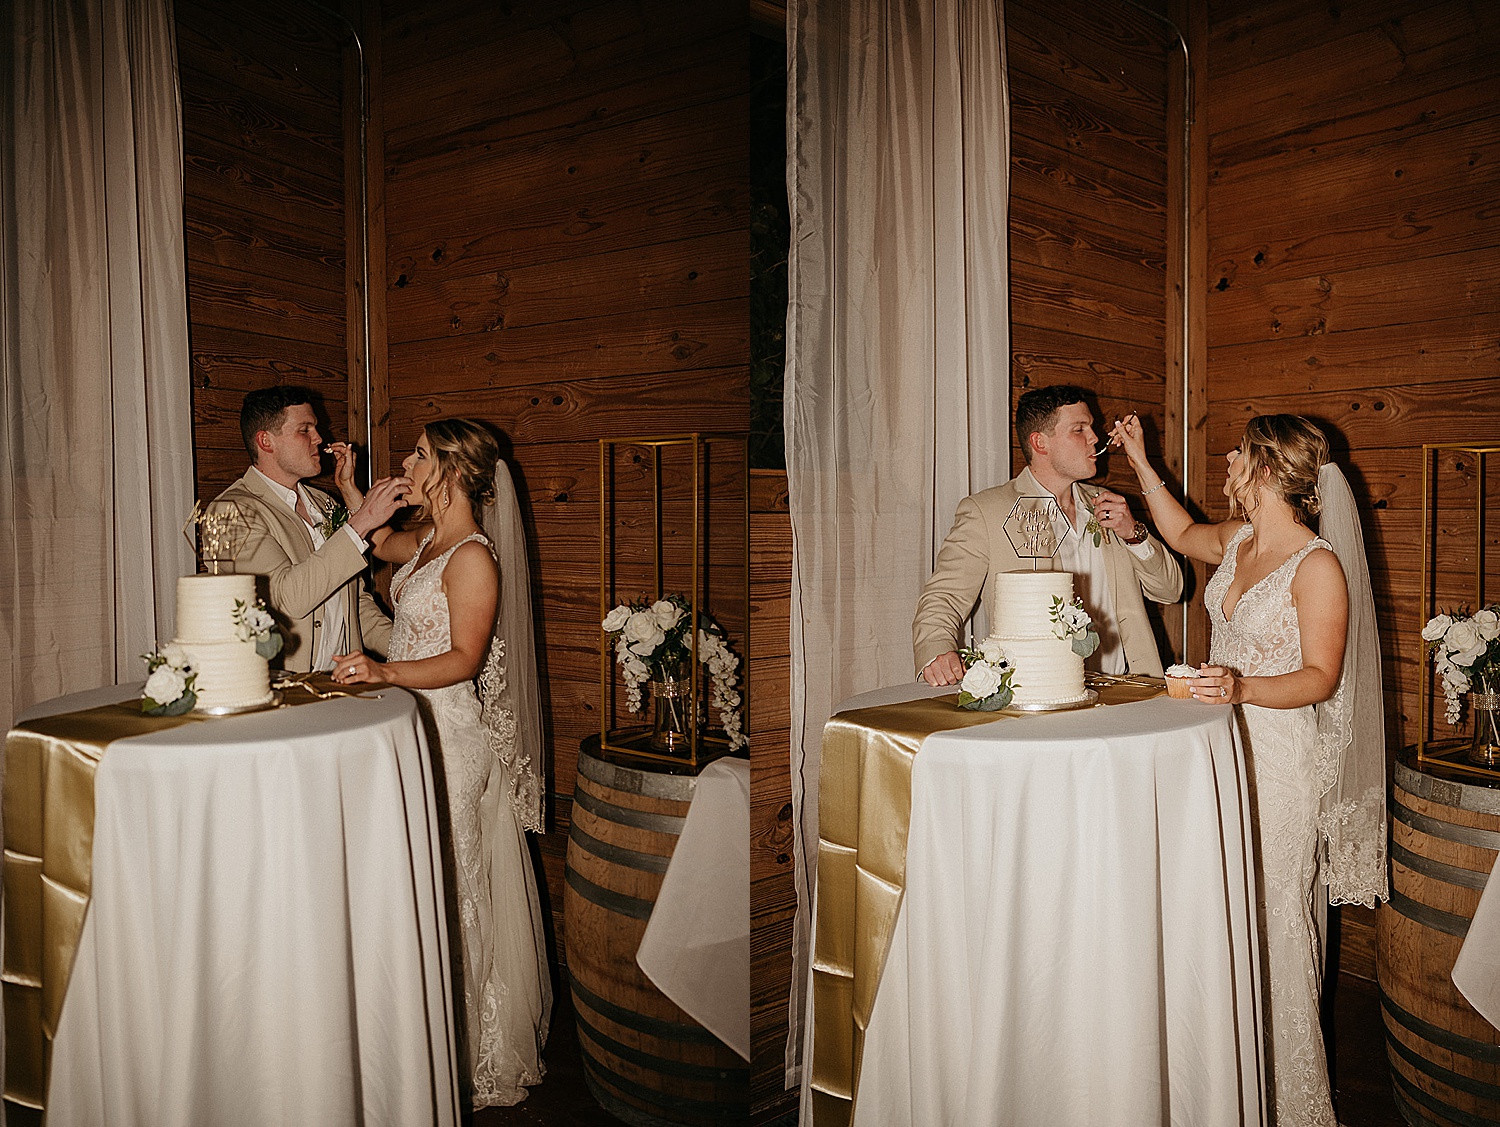 Bride and groom feed each other wedding cake during wedding reception at Lauren Hill Farm